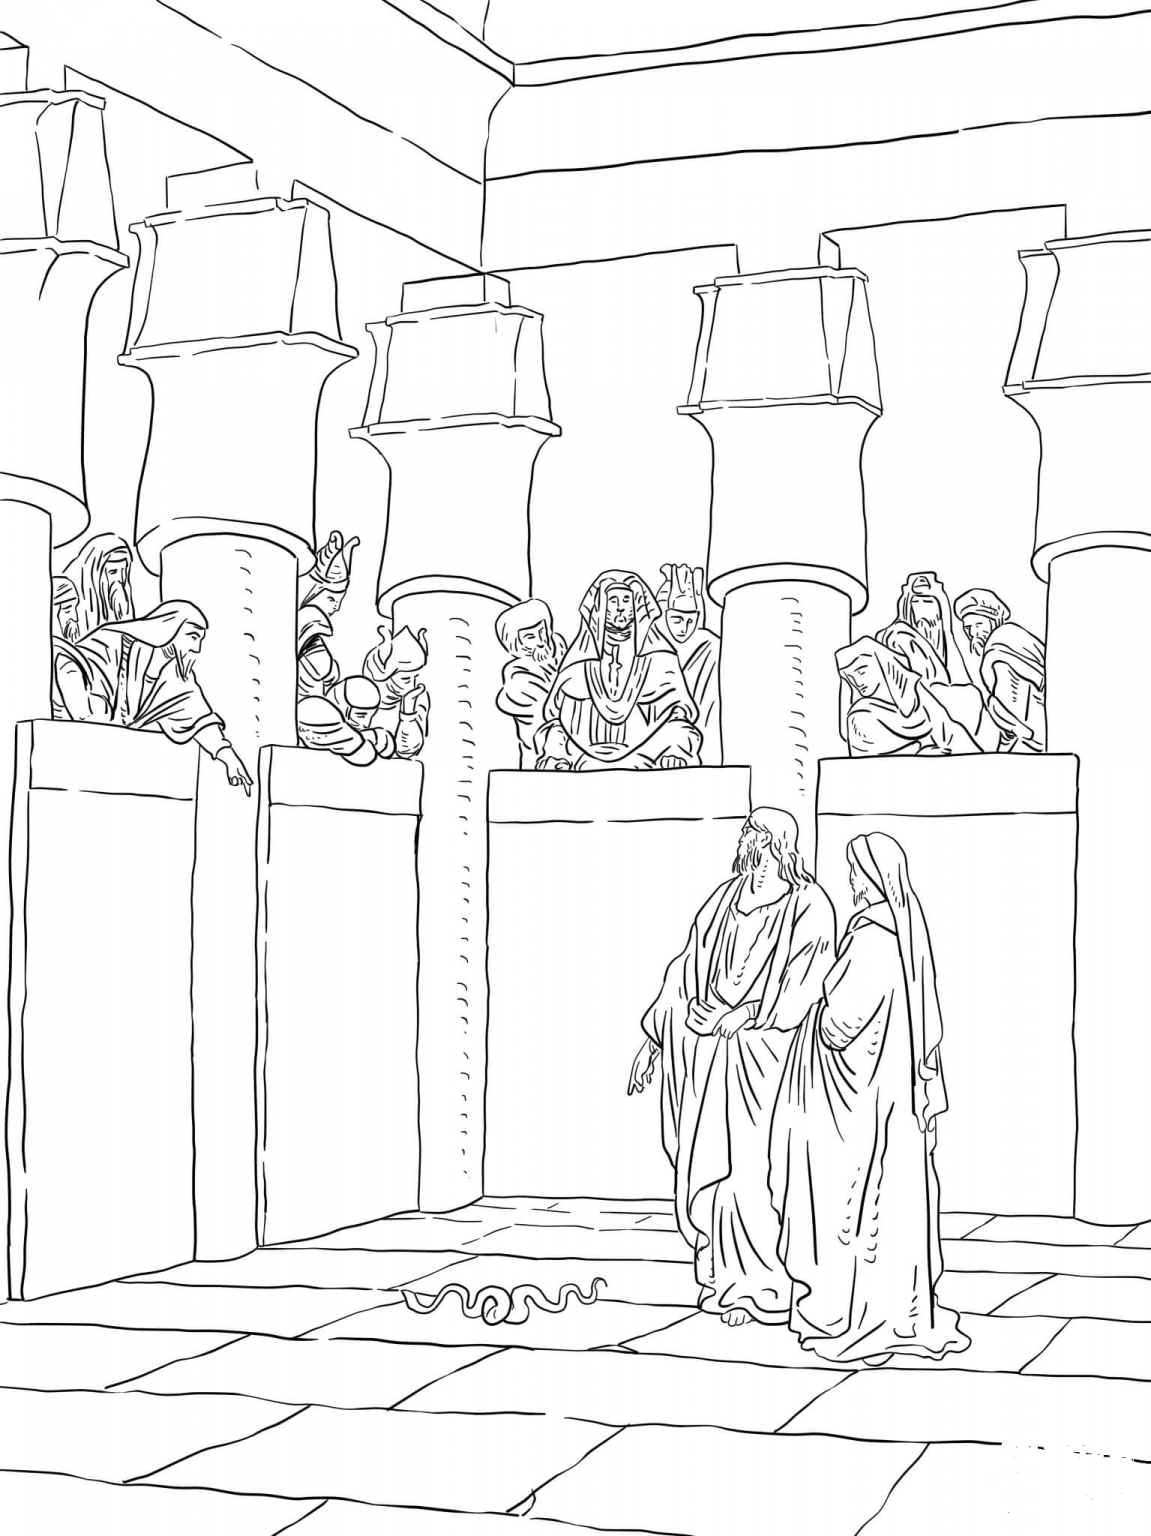 moses-and-aaron-appear-before-pharaoh-coloring-page-colouringpages